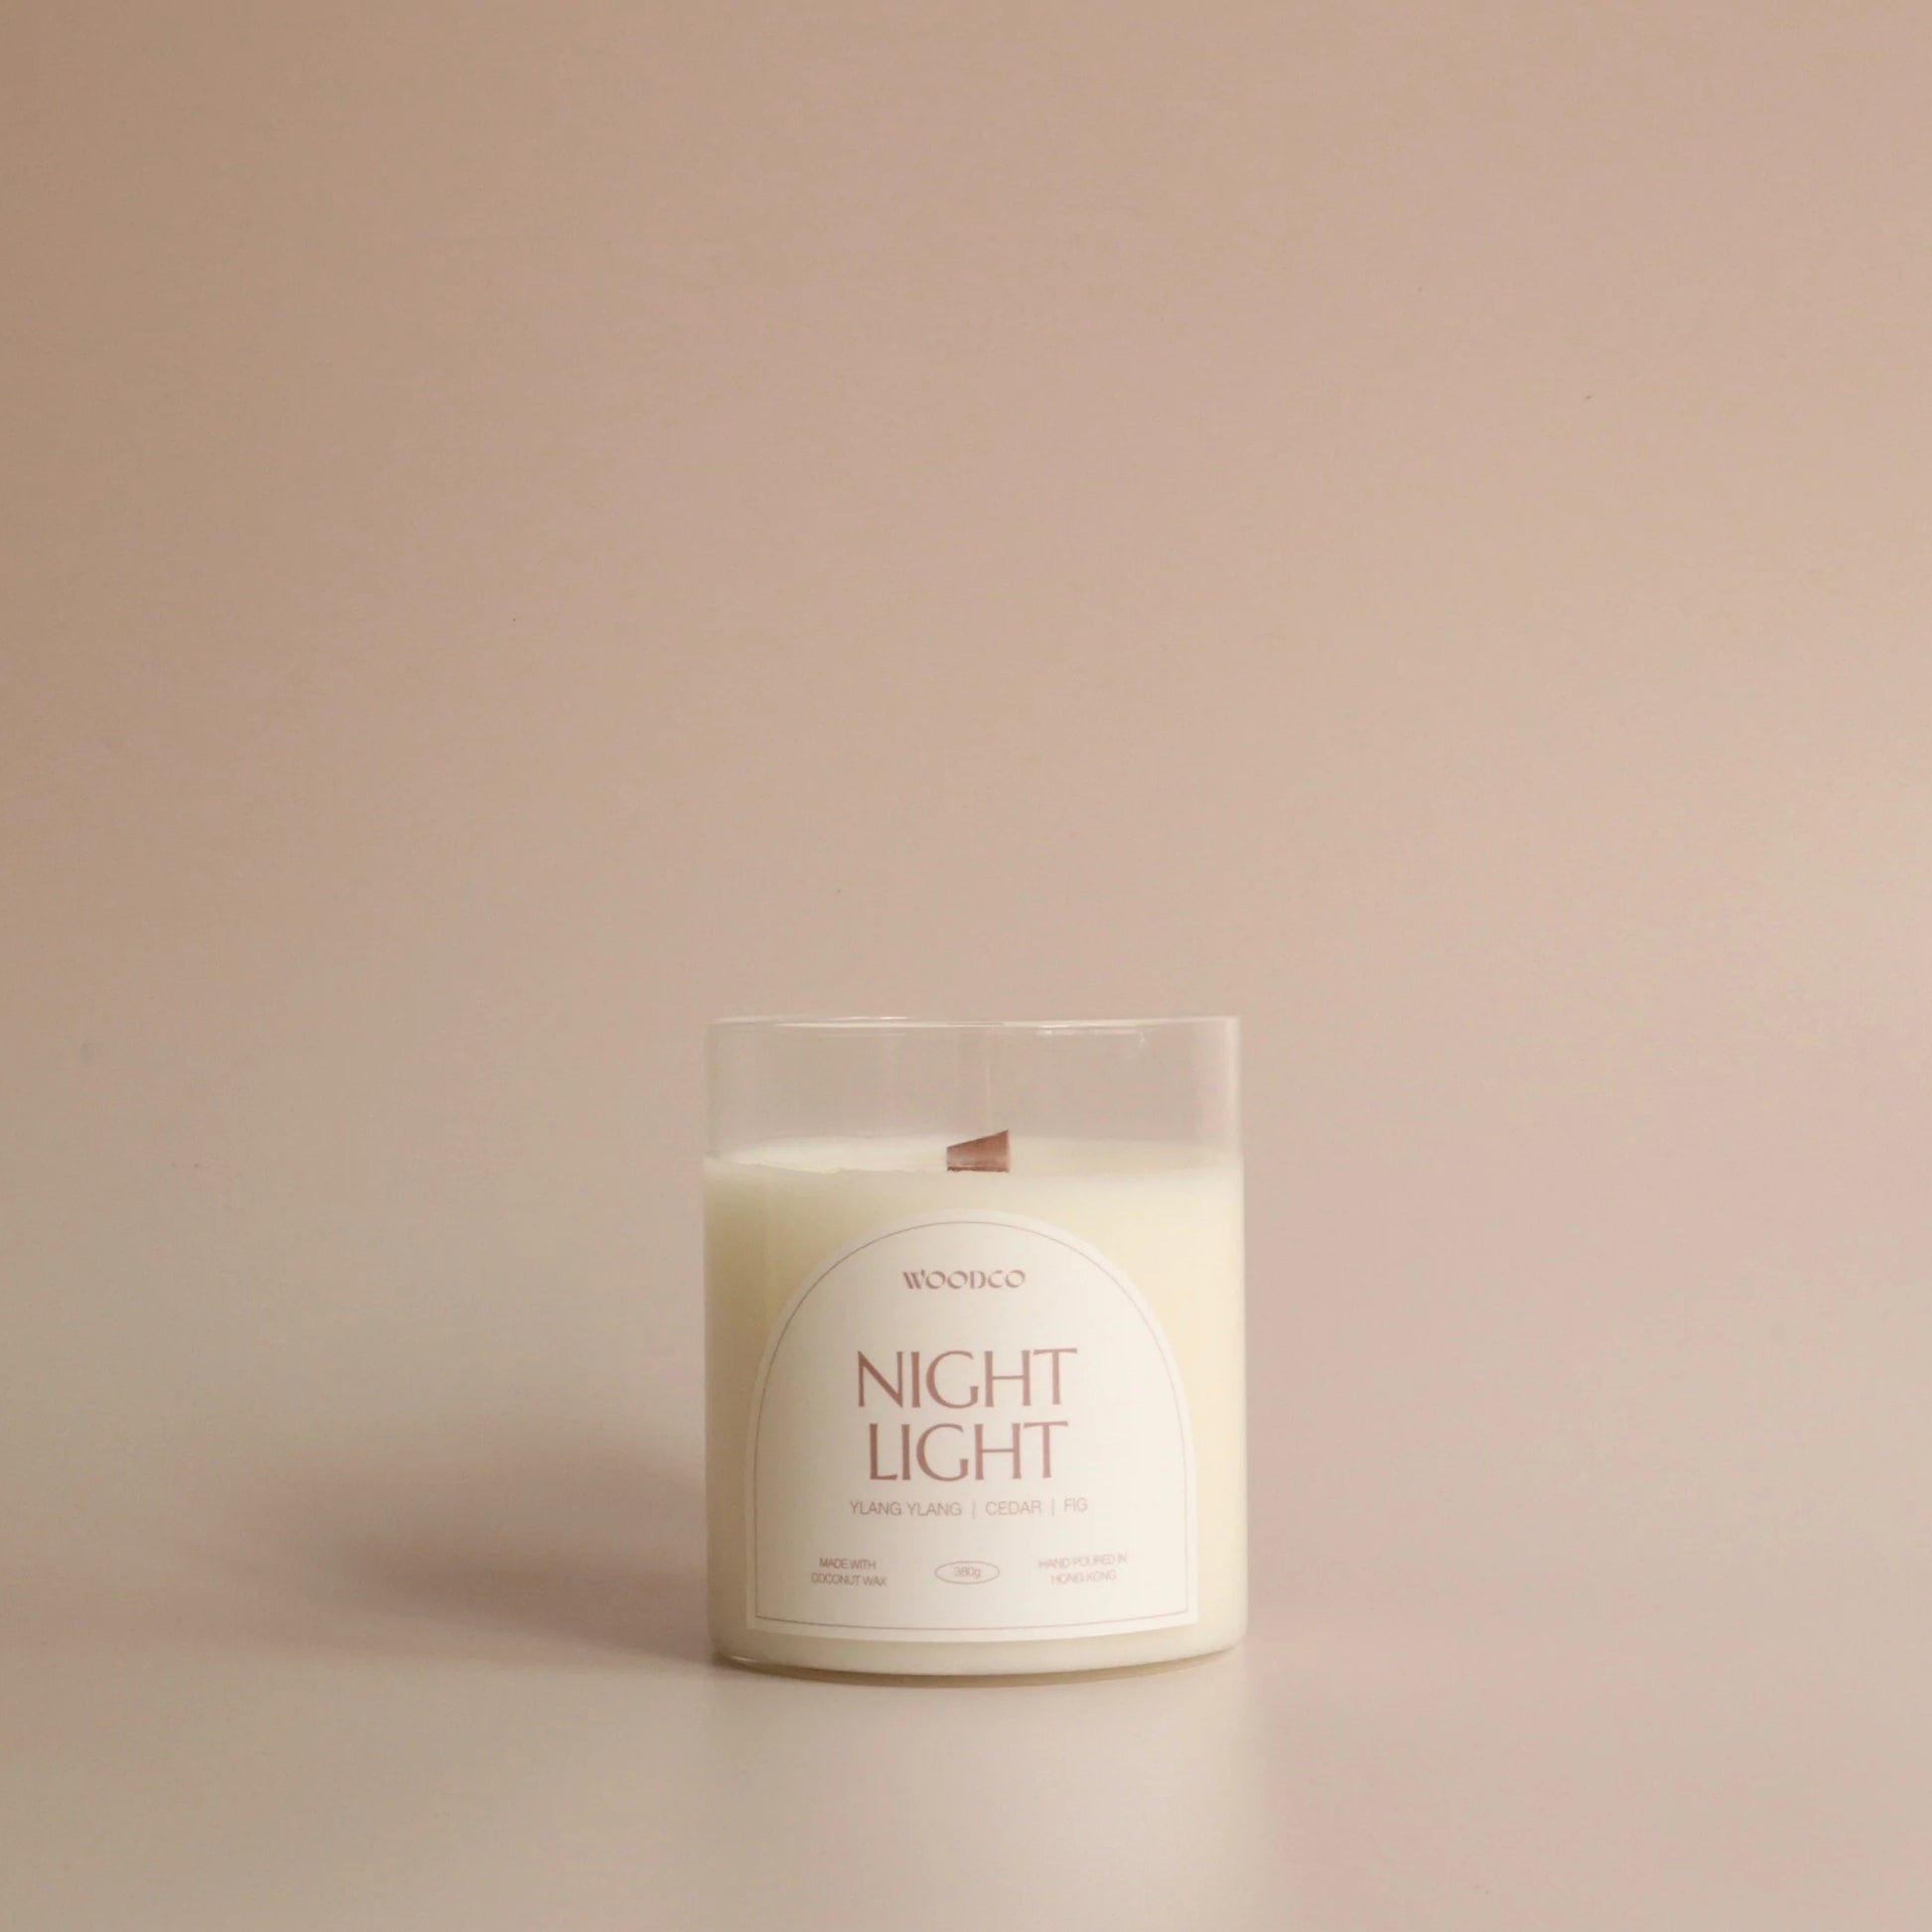 Night Light scented candle